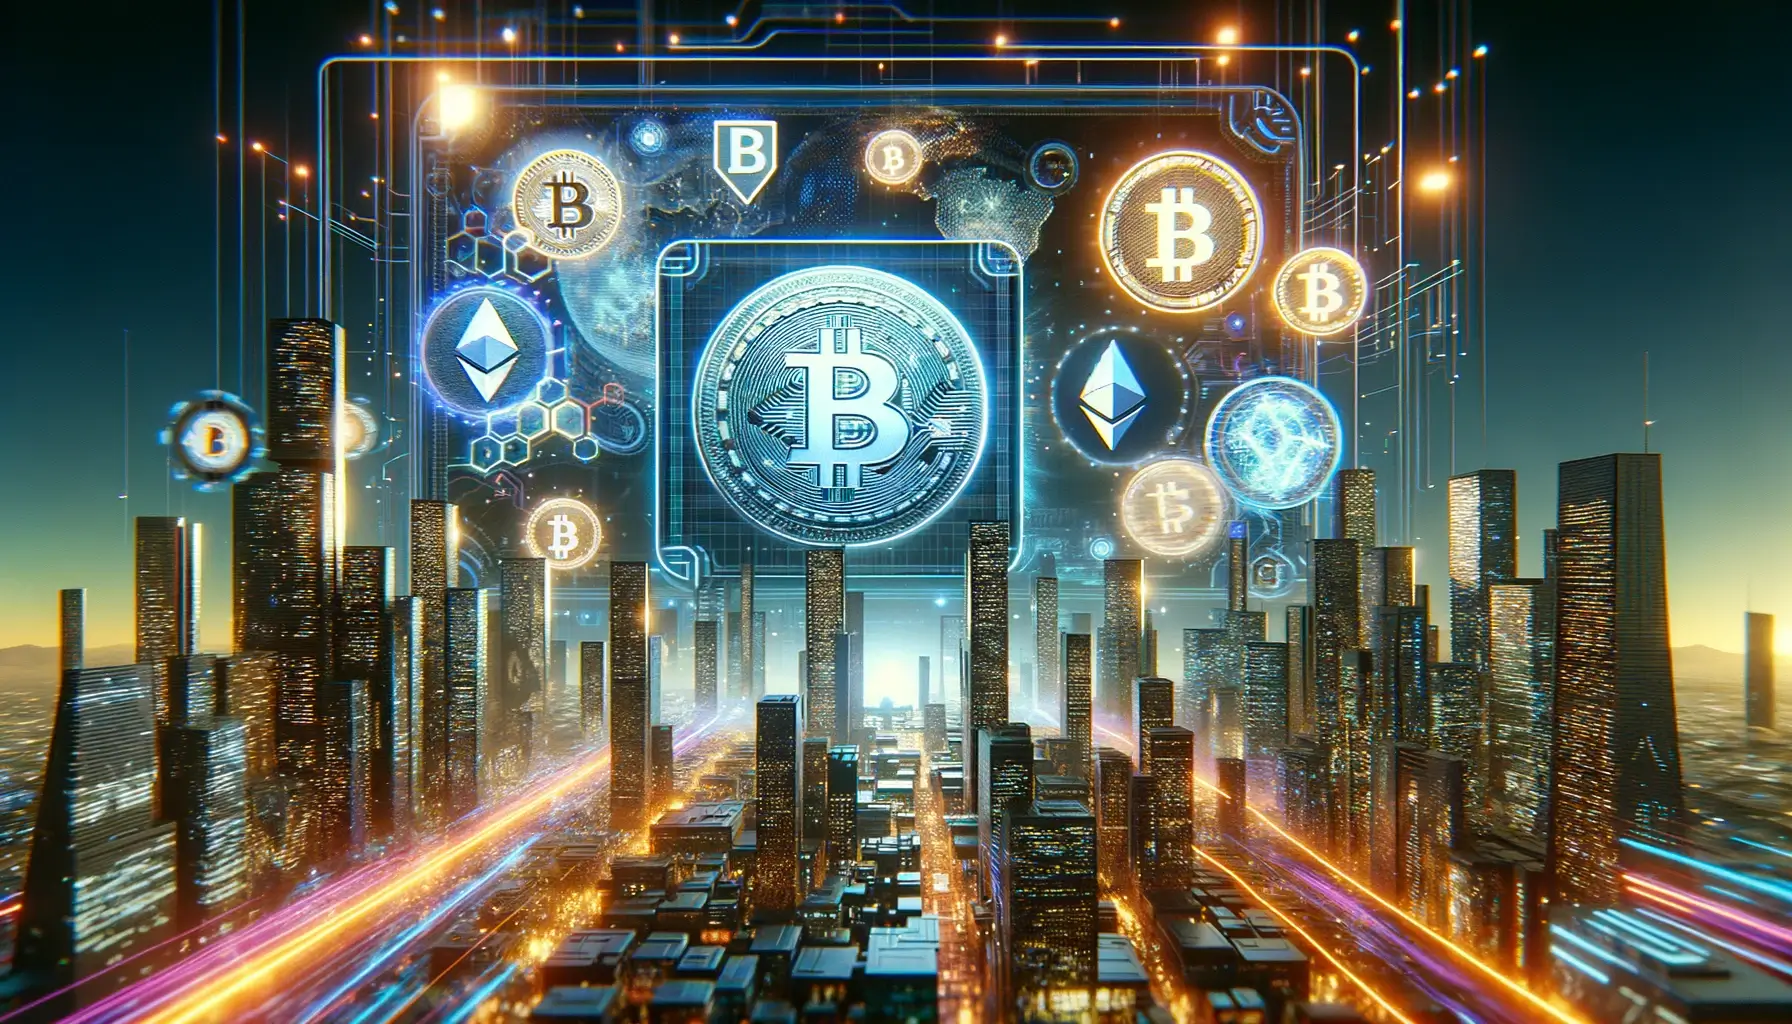 Cryptocurrencies in the Metaverse